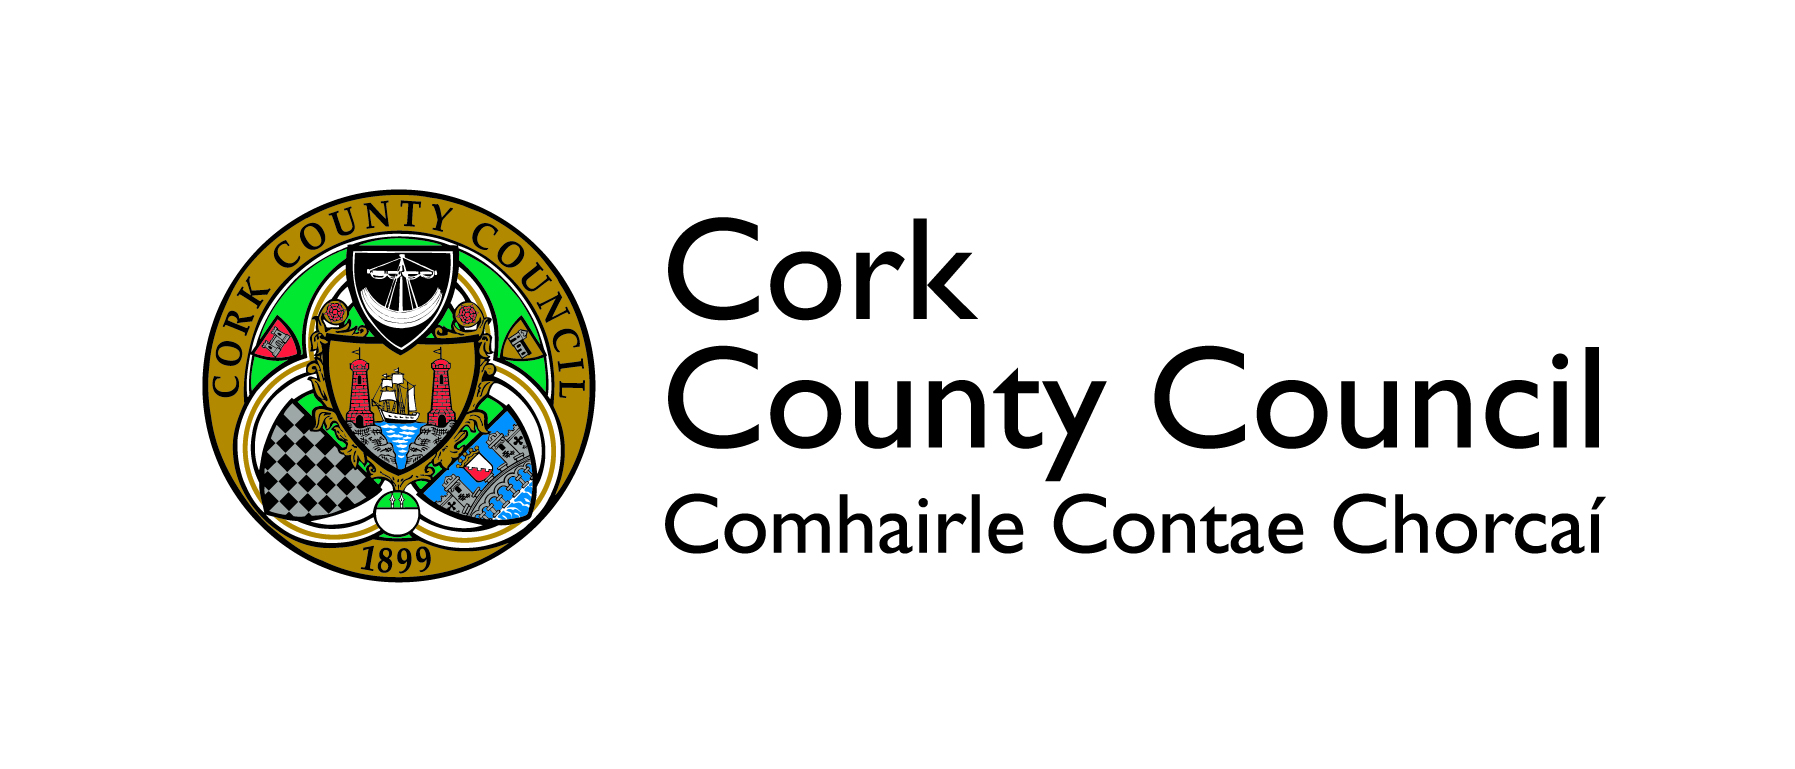 “Your Council” – a new online Customer Portal Service launched by Cork County Council